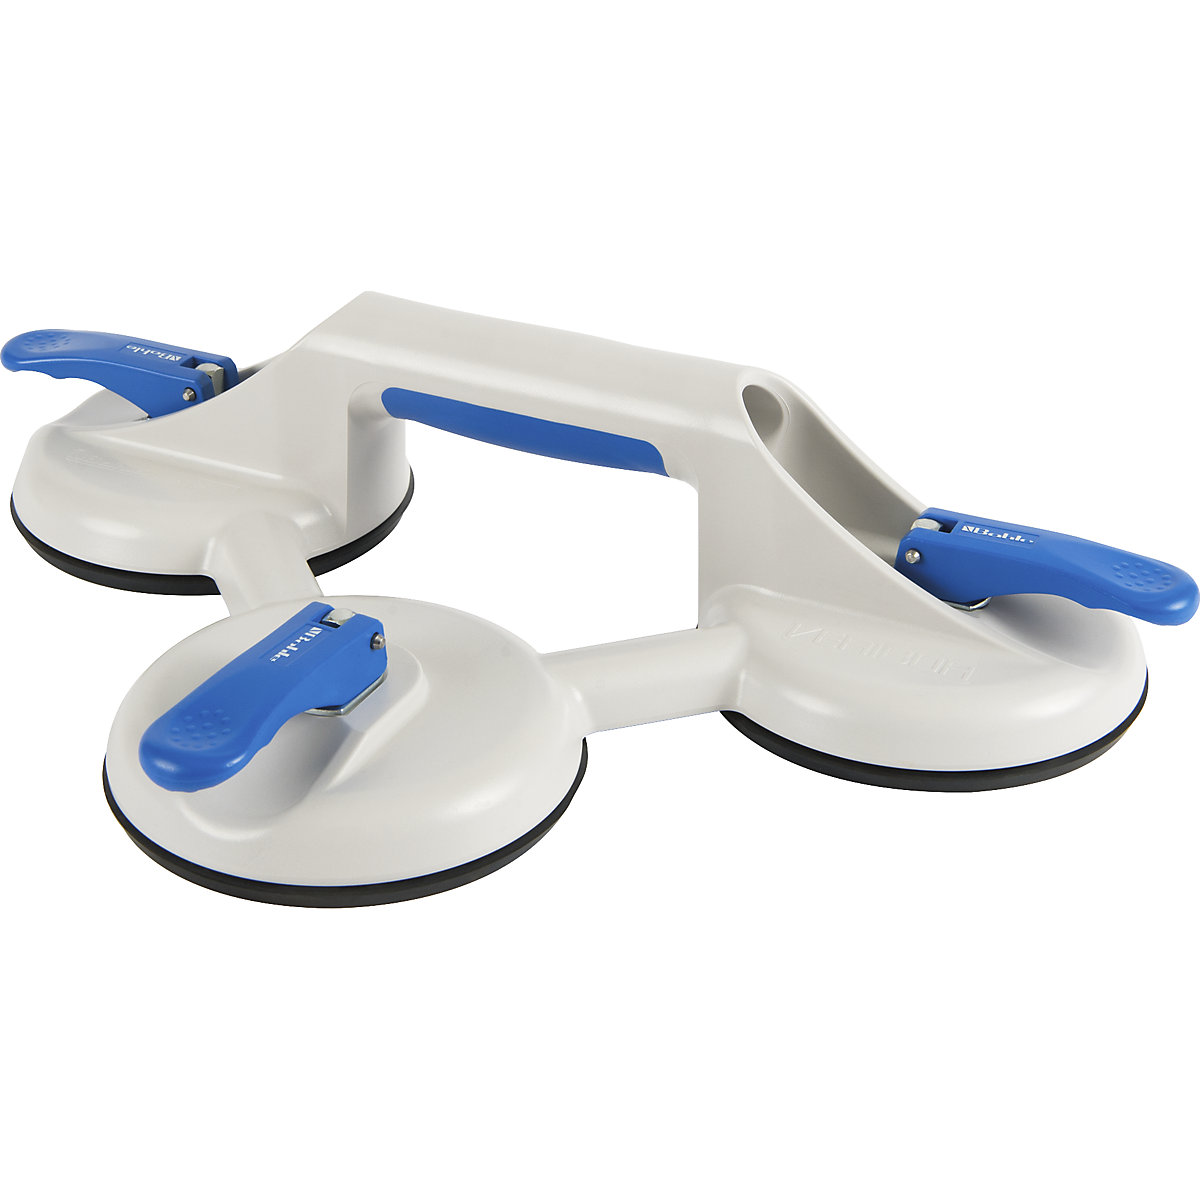 VERIBOR® lever activated suction lifter – Bohle